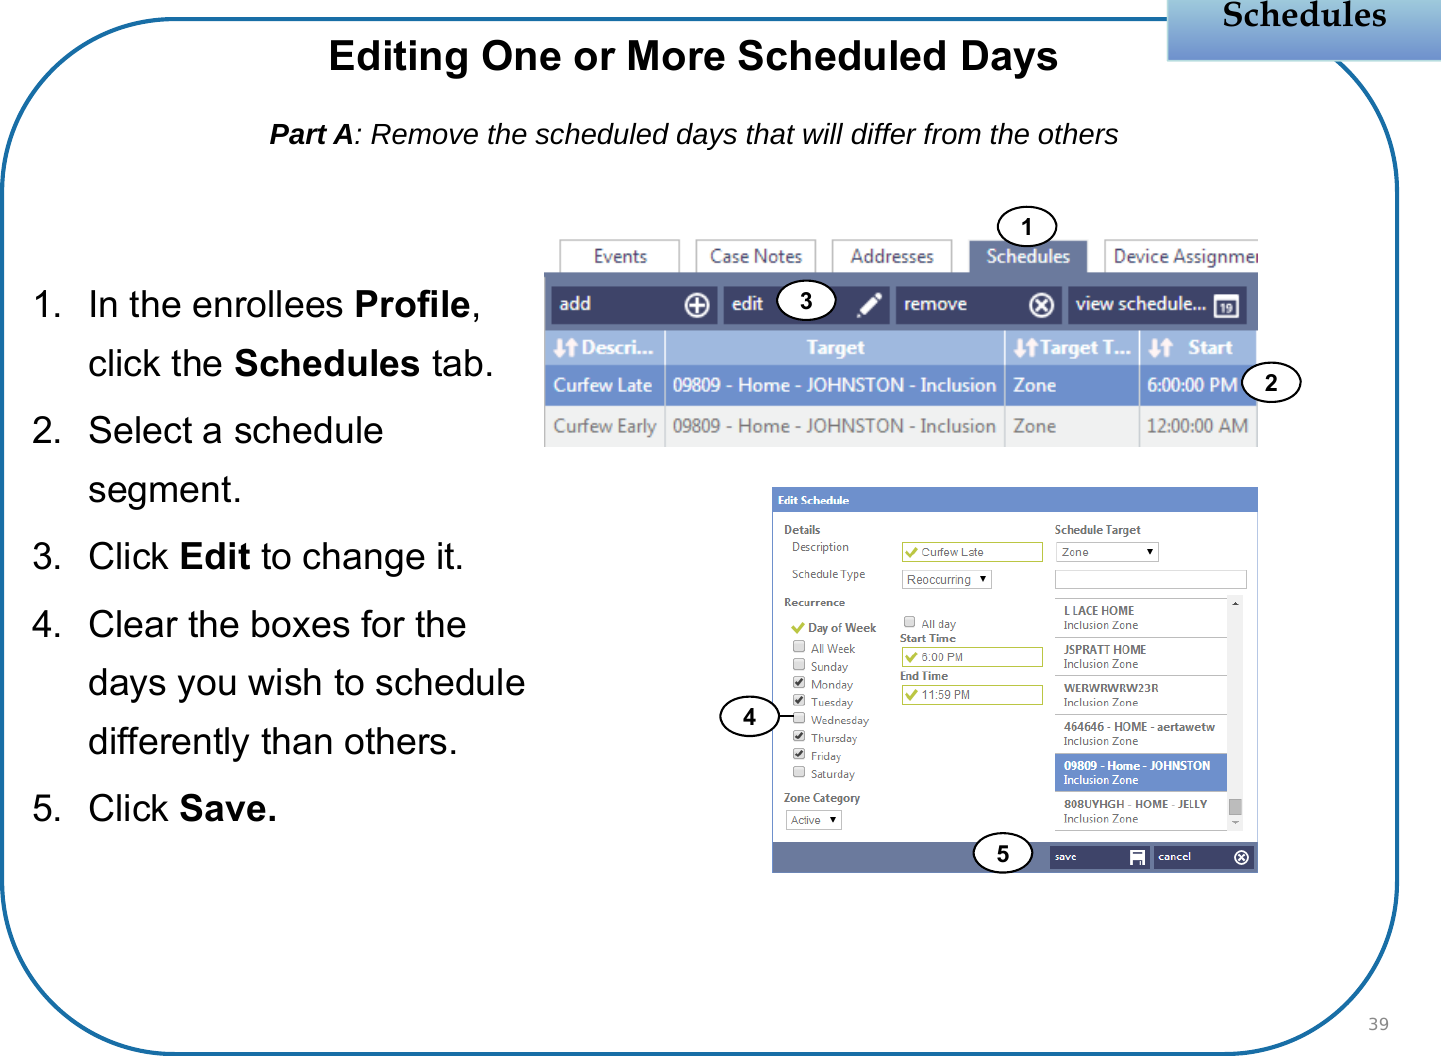 Schedules1. In the enrollees Profile, click the Schedules tab.2. Select a schedule segment.3. Click Edit to change it.4. Clear the boxes for the days you wish to schedule differently than others.5. Click Save.39Editing One or More Scheduled DaysPart A: Remove the scheduled days that will differ from the othersF12345